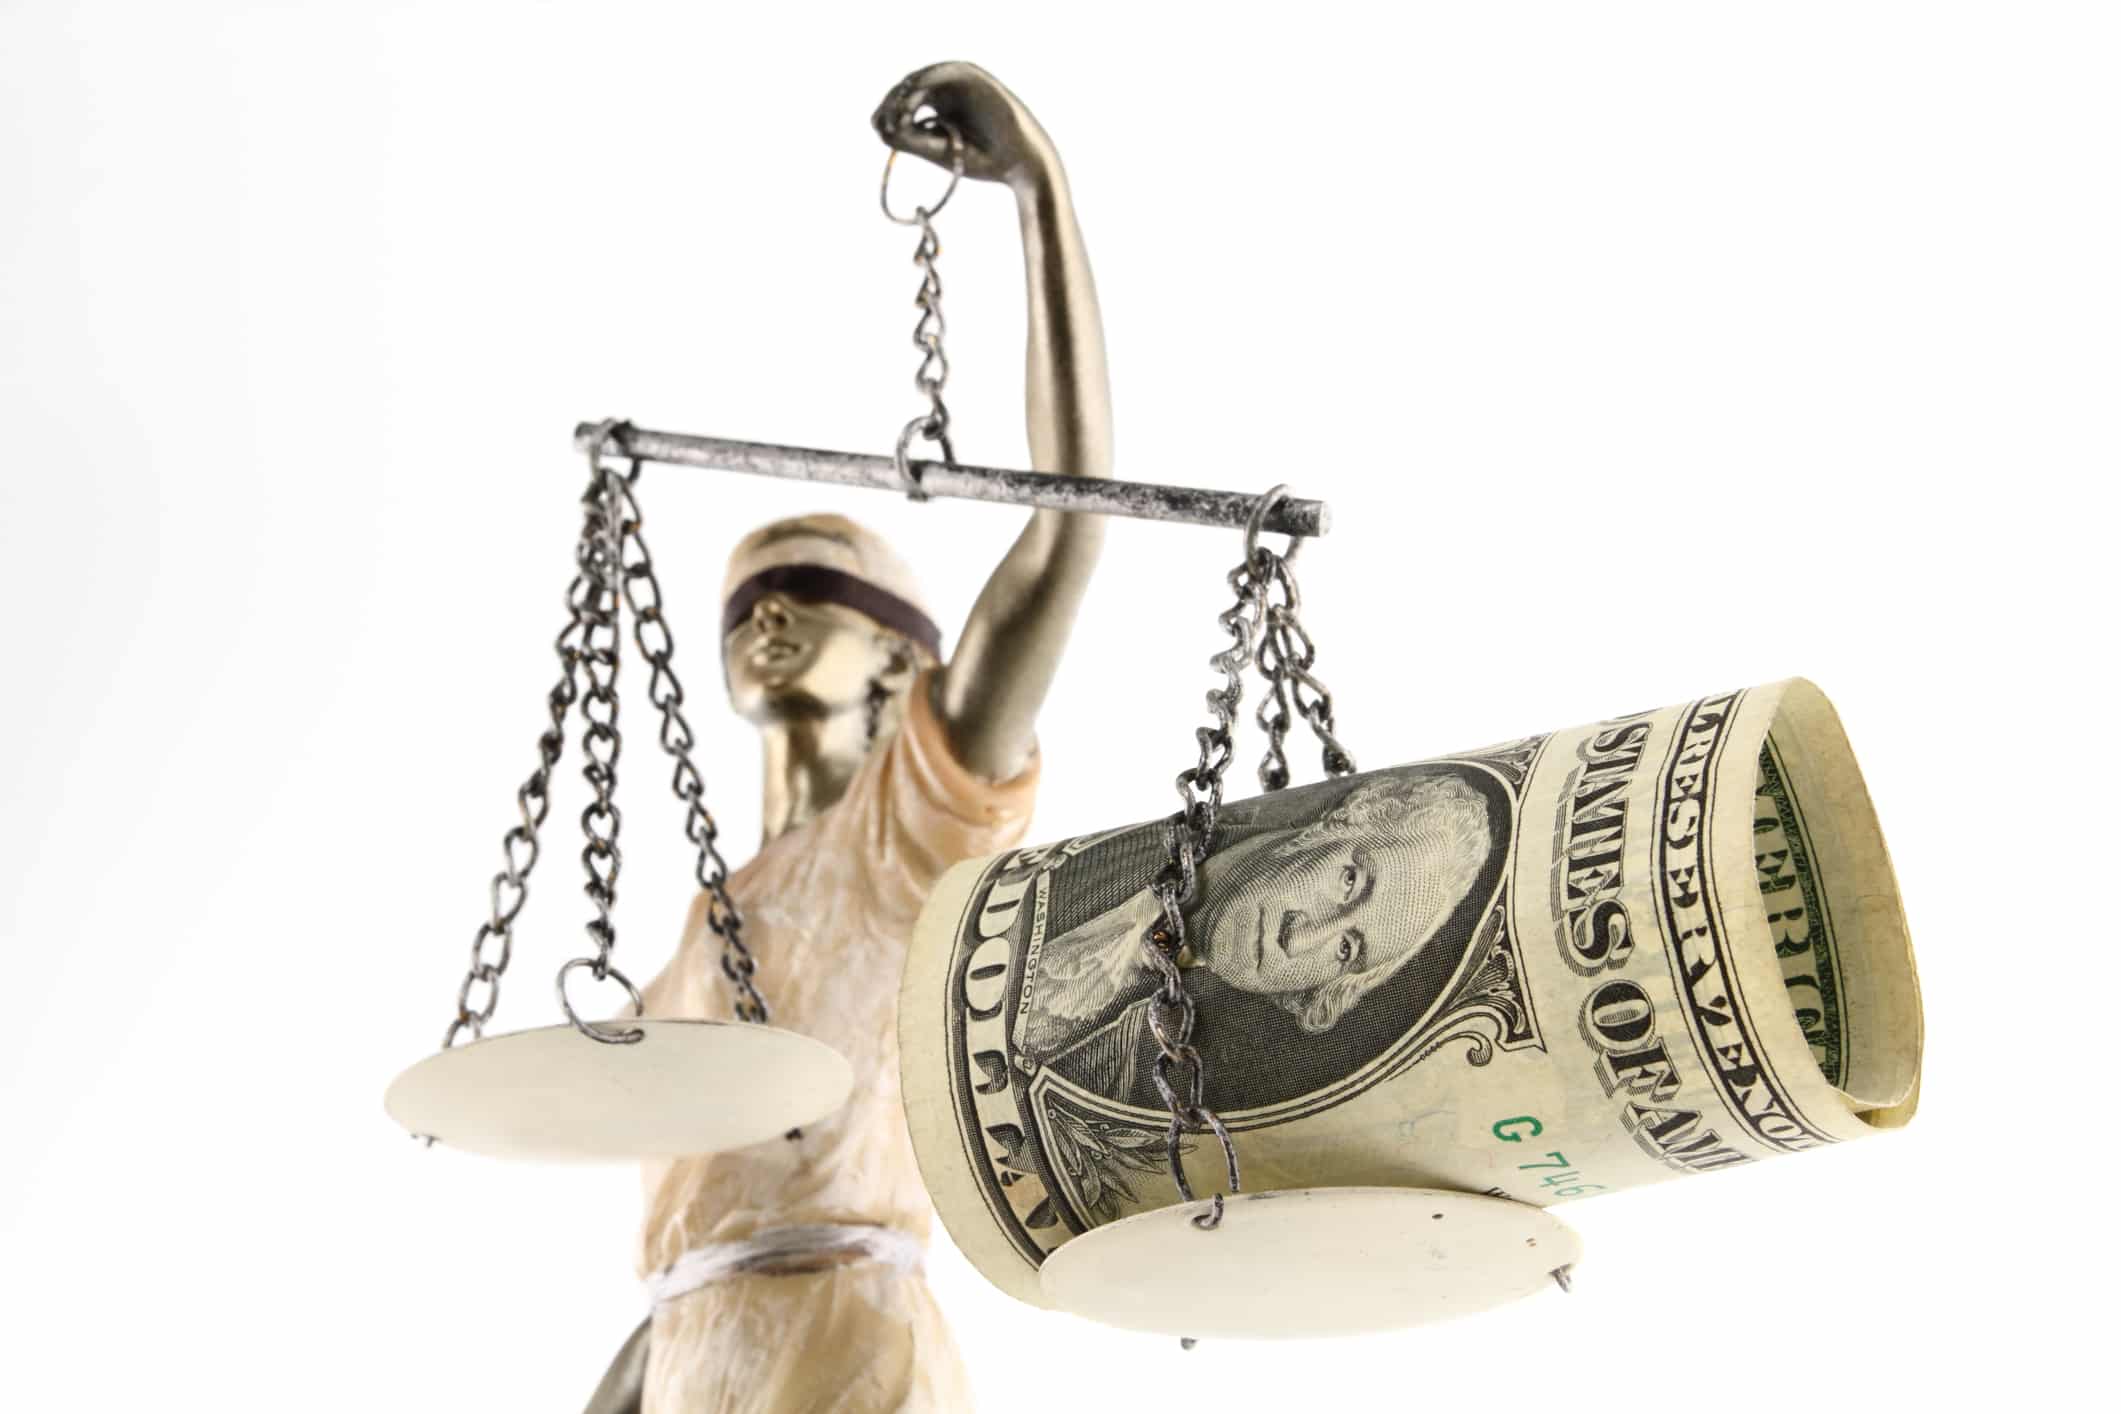 Money myths. lady justice blindfolded with scales, sword and money on one scale.